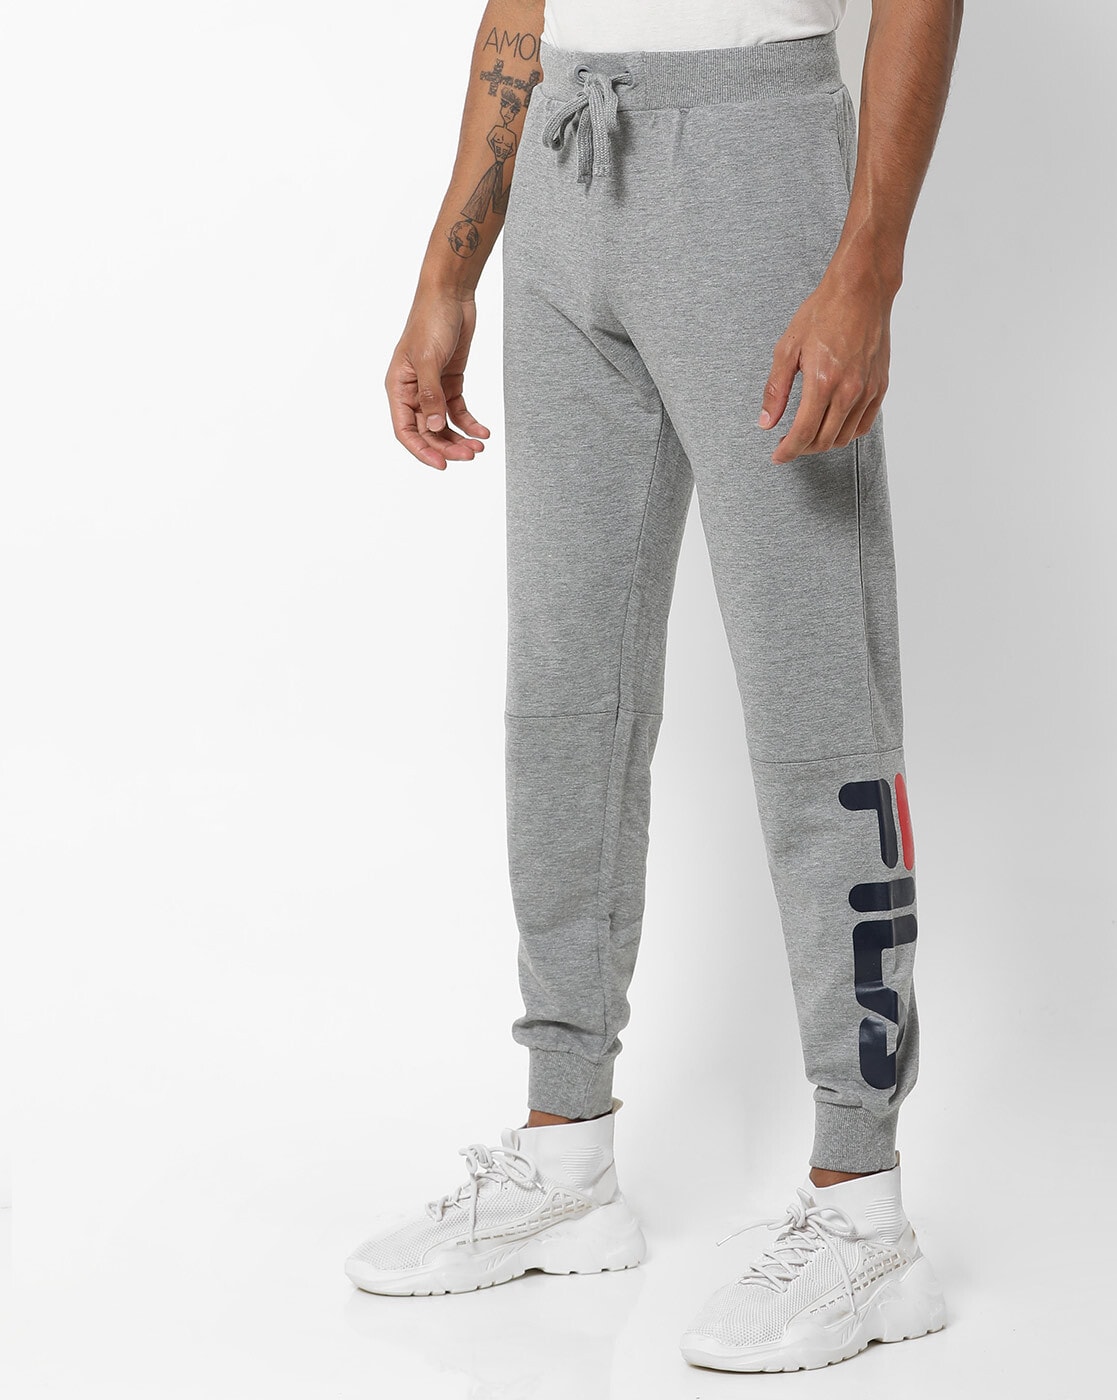 Buy FILA Grey French Terry Mens Pants  Shoppers Stop